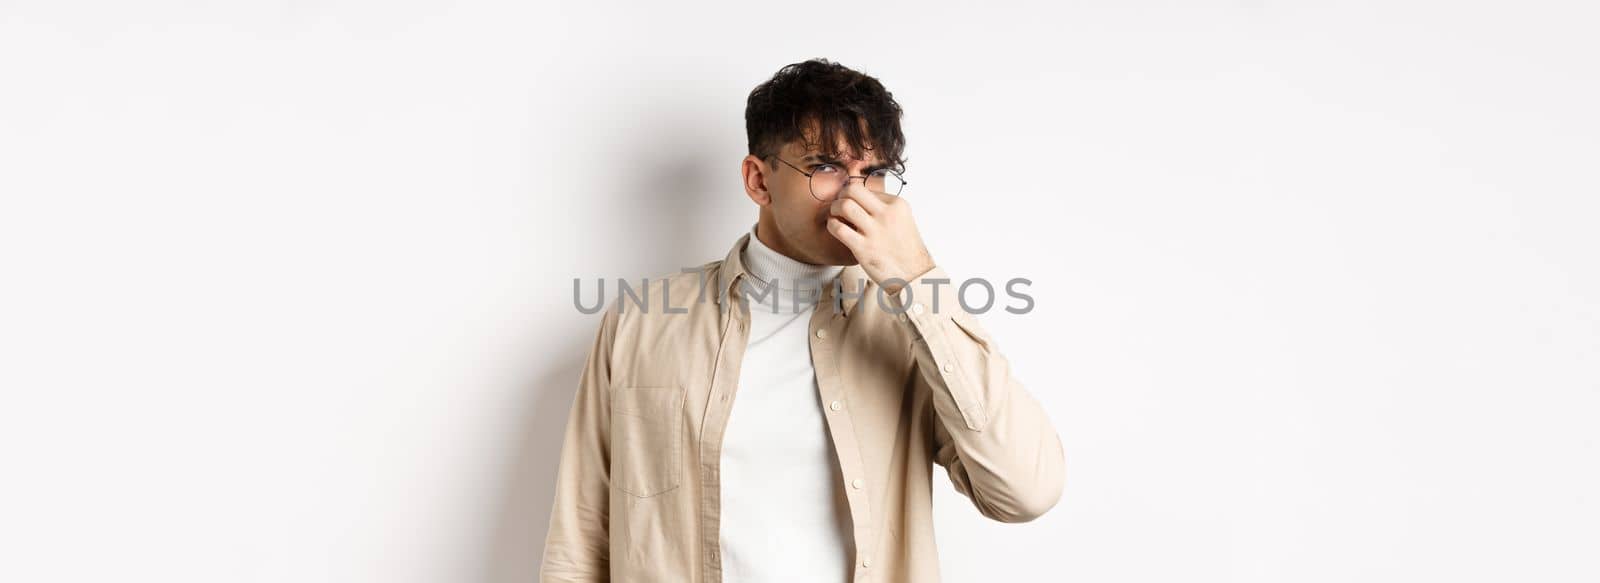 Image of disgusted guy shut his nose from awful smell, looking at something disgusting and stinky, standing on white background.